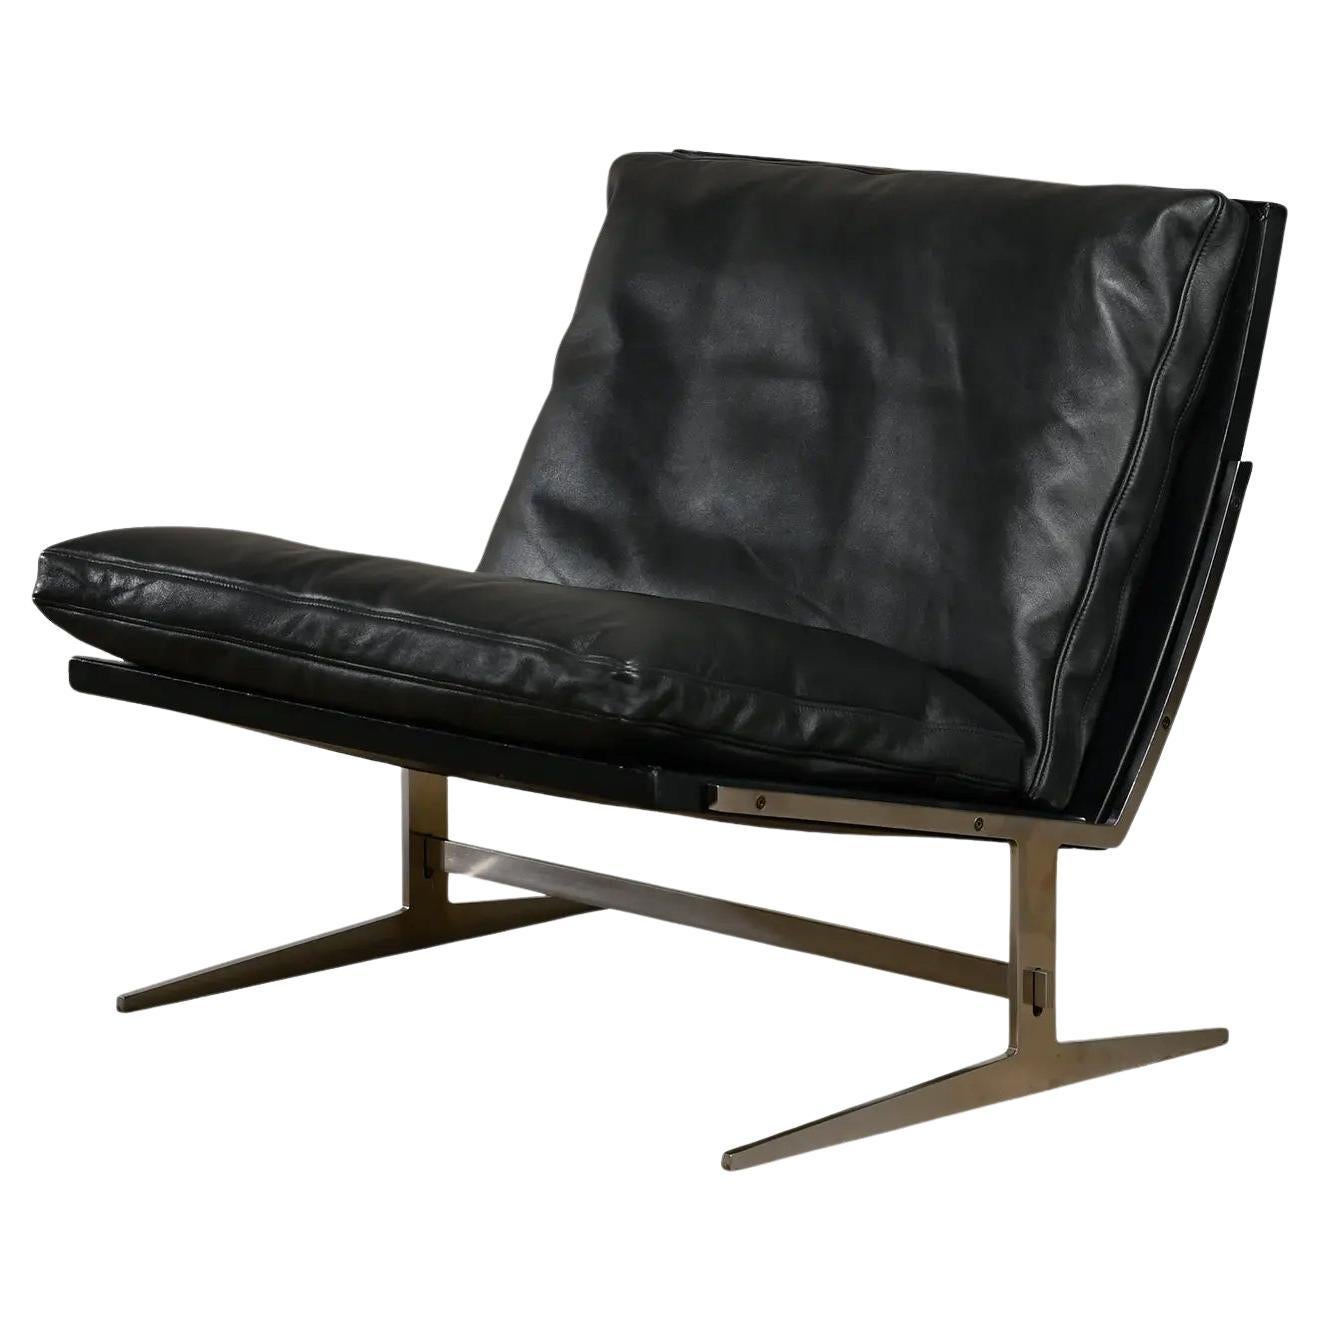 Kastholm & Fabricius BO-561 Lounge Chair in Black Leather by Bo-Ex, Denmark